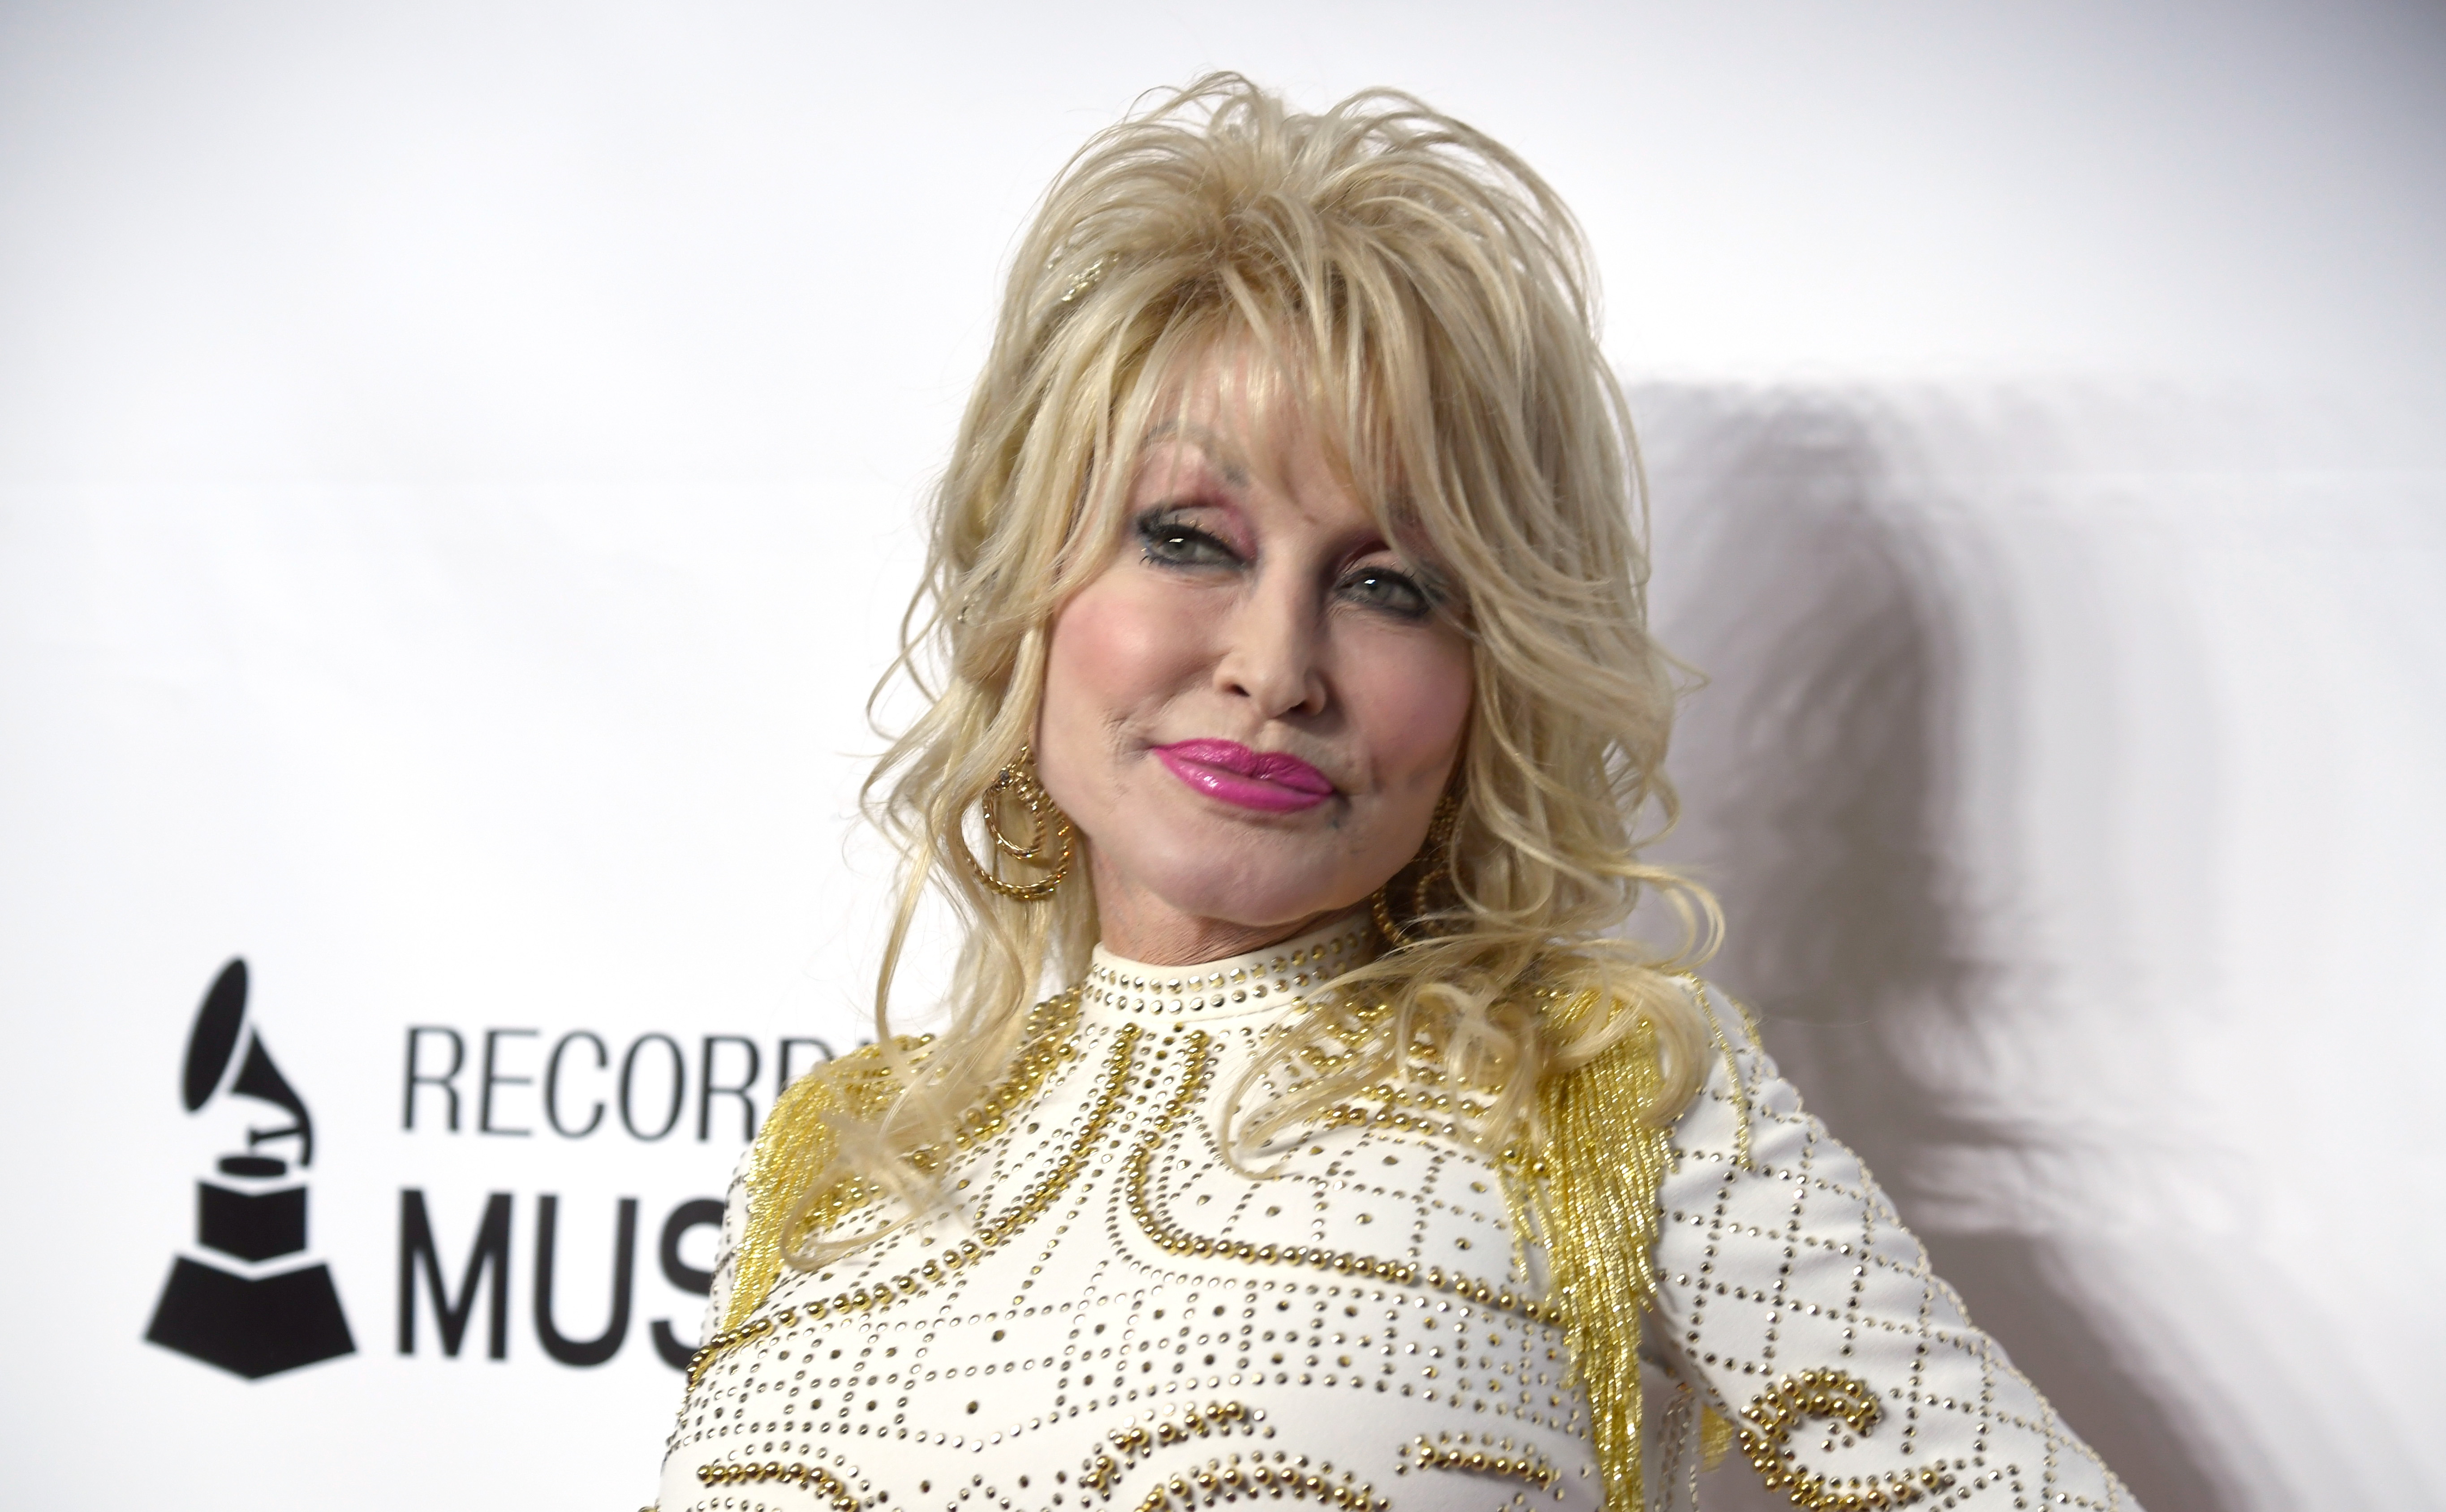 A close-up of Dolly Parton on the red carpet in a white and gold dress.